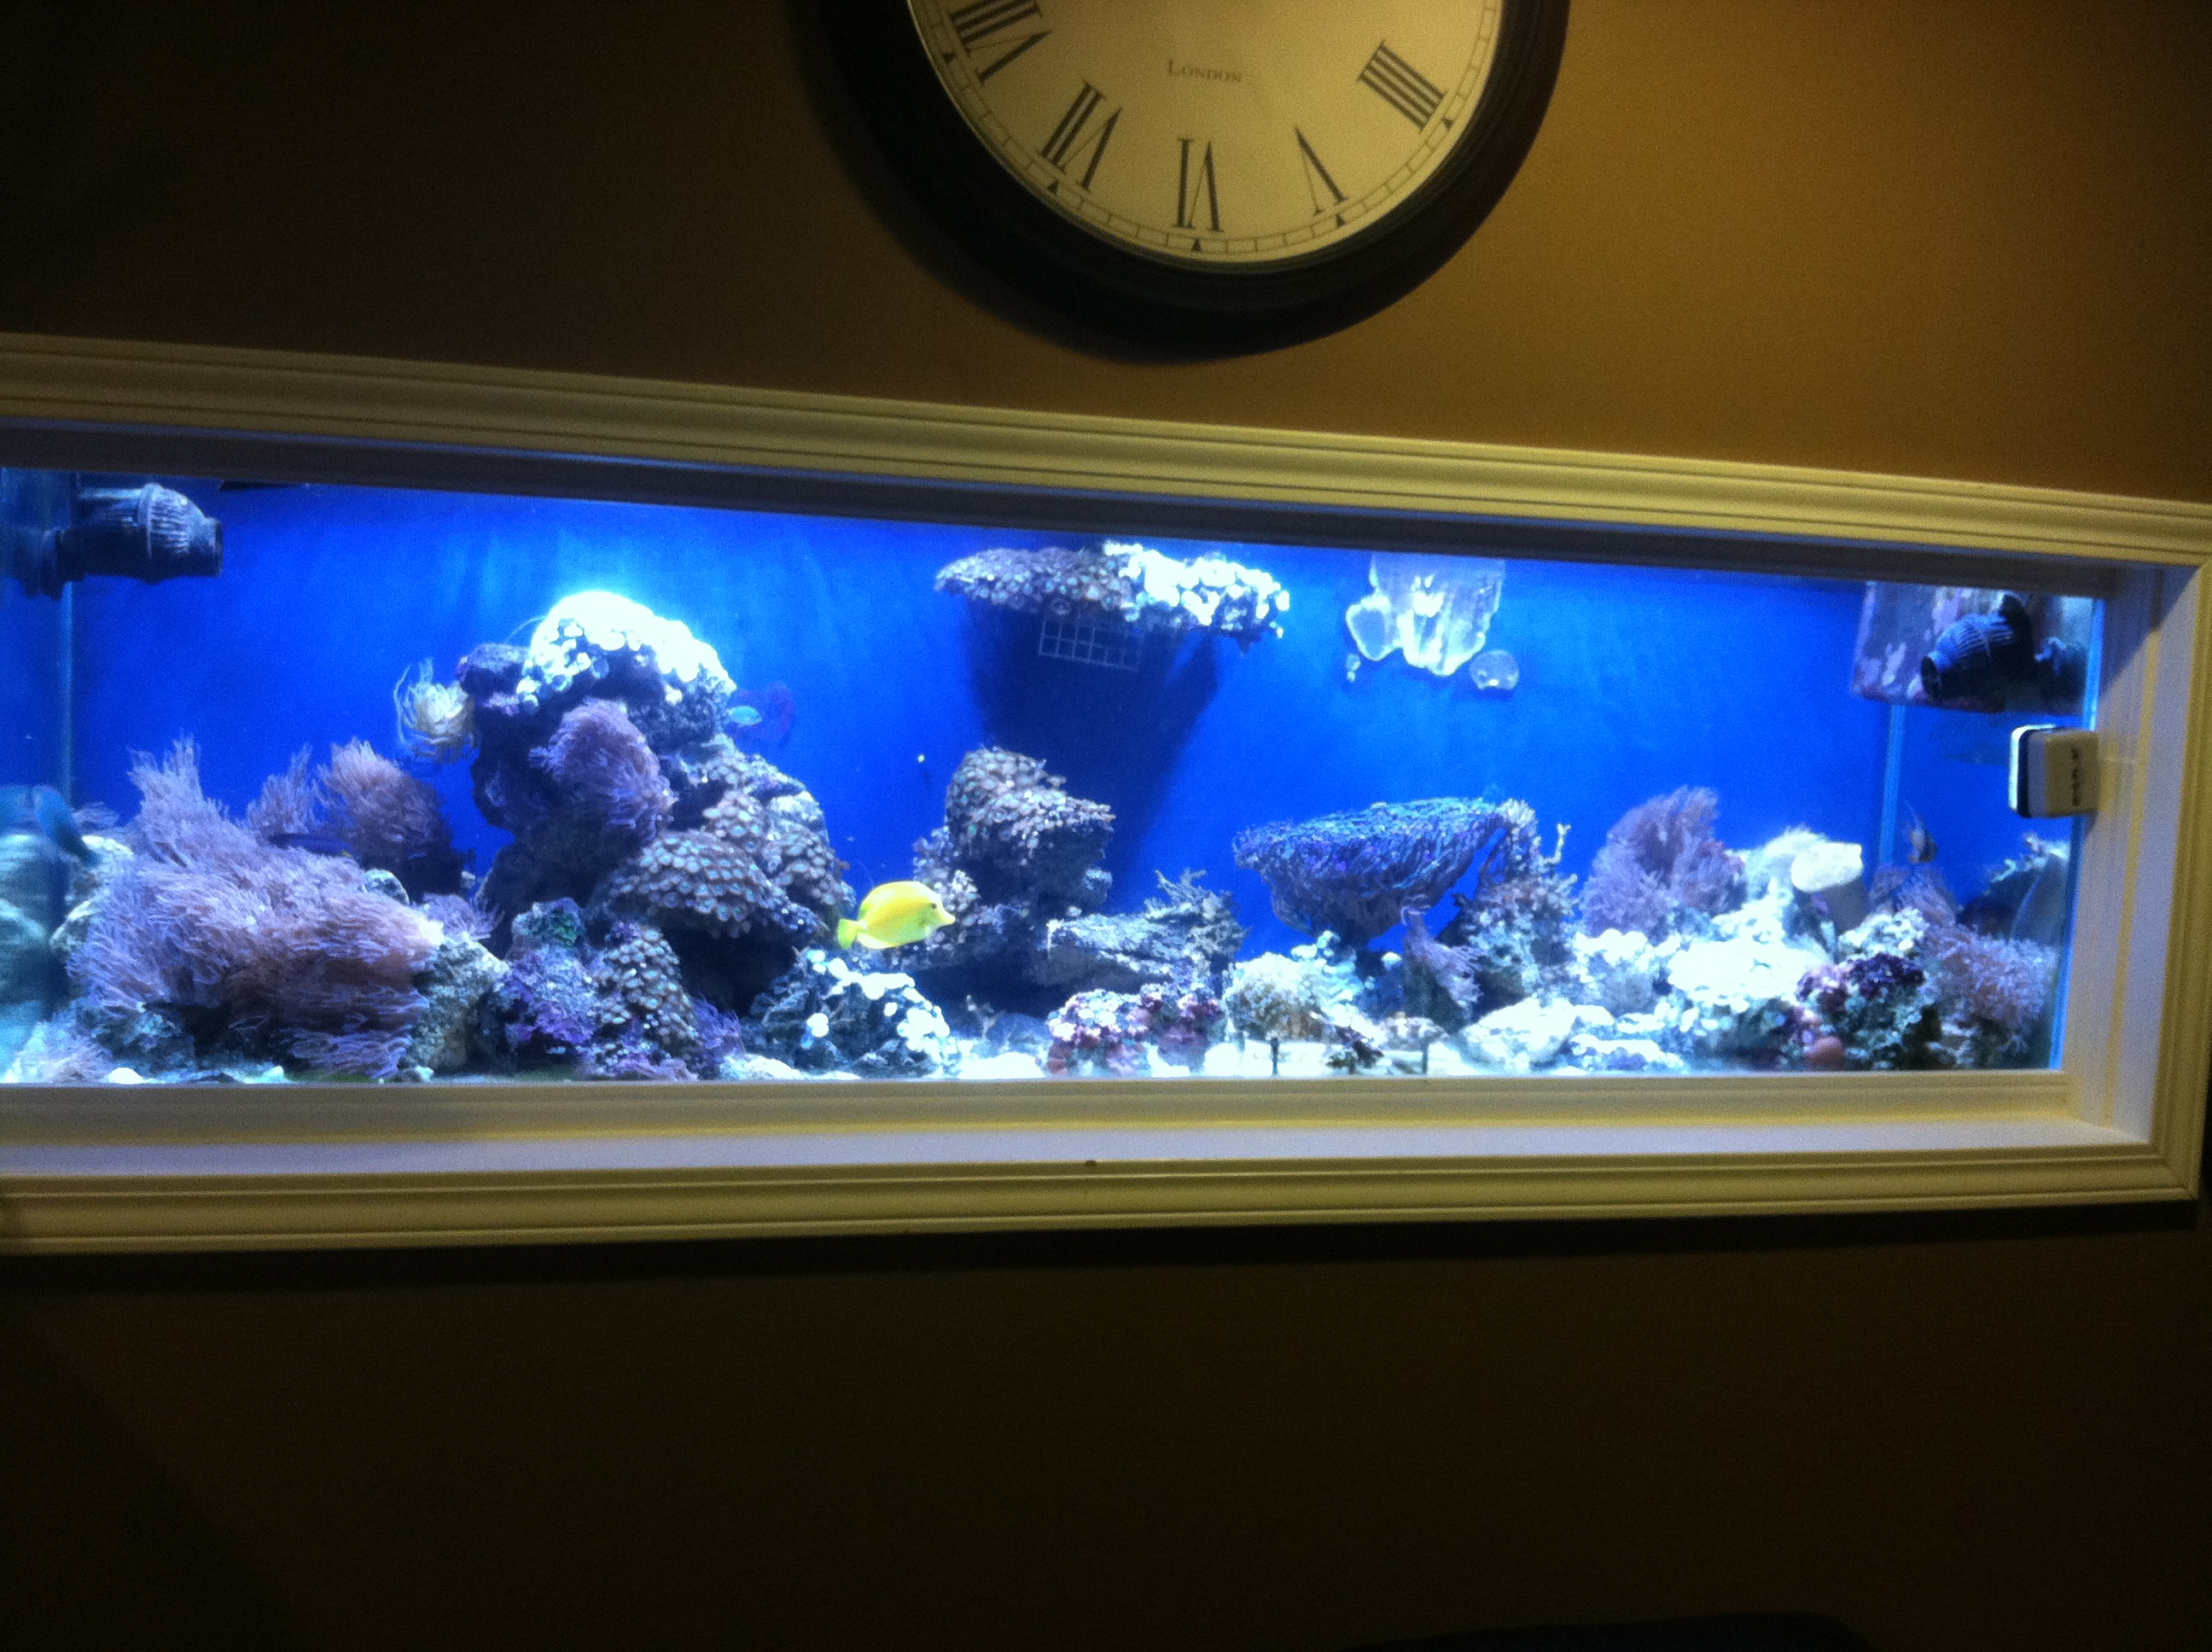 New 300 Gallon In Wall Tank Build Saltwaterfish Com Forums For Fish Lovers,Sausage Gravy Pizza